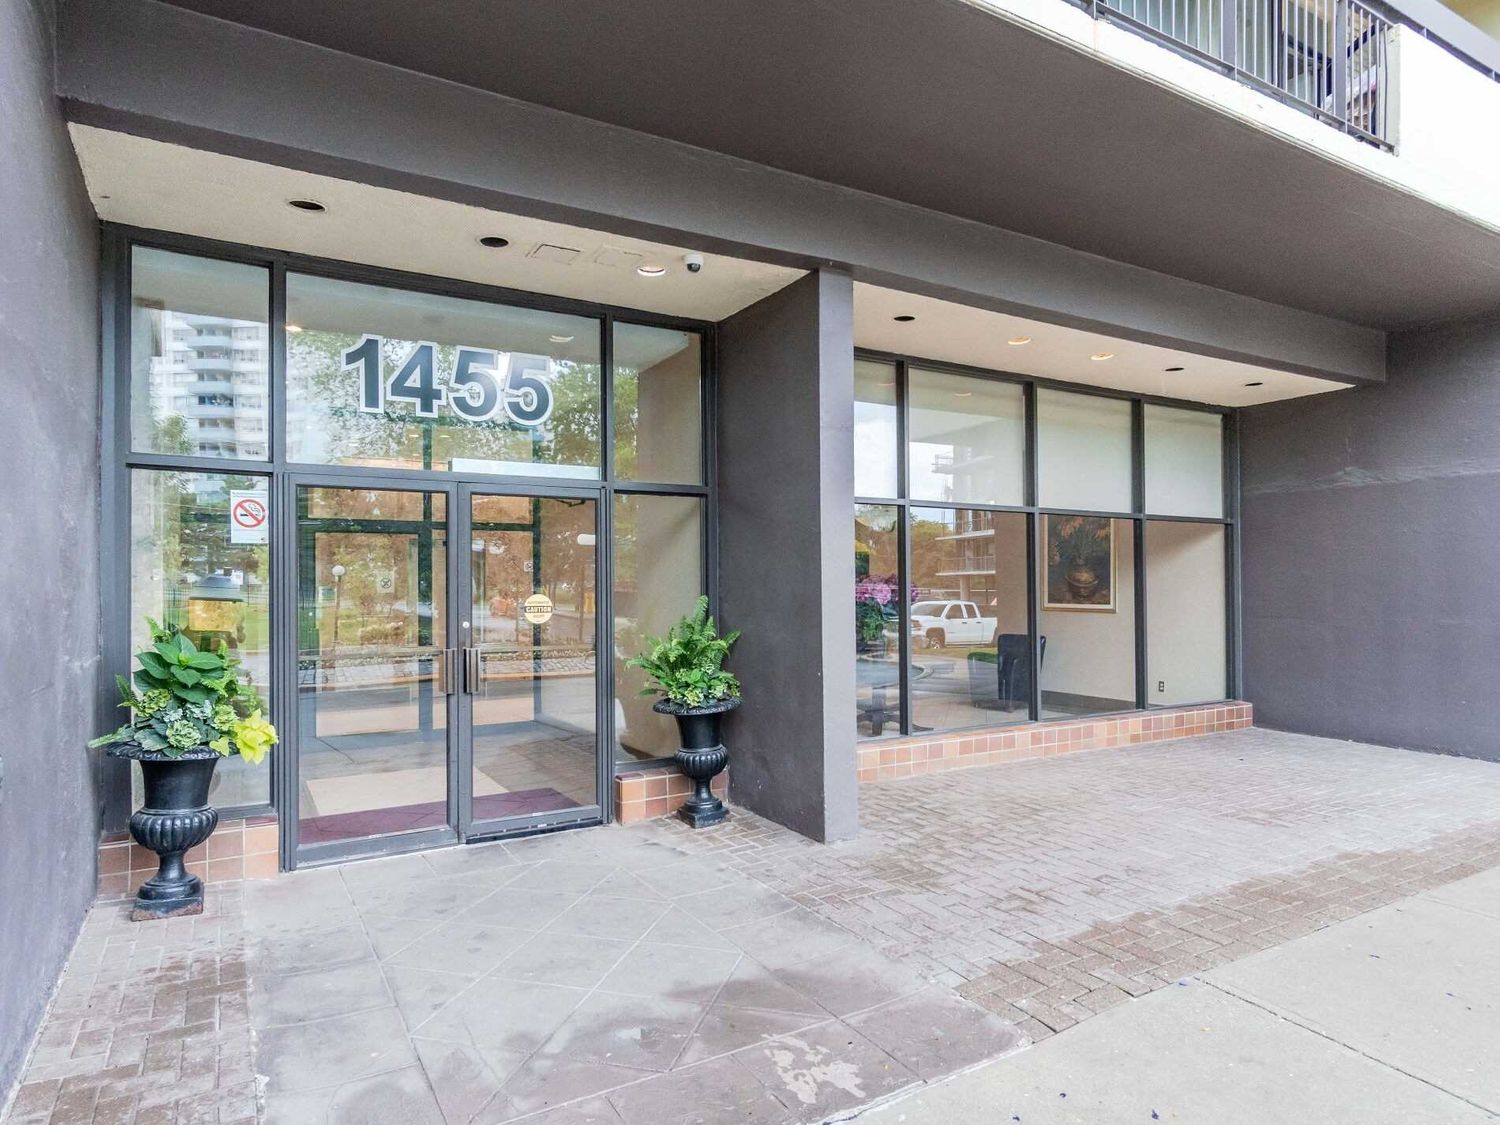 1455 Lawrence Avenue W. Lawrence Square Condos is located in  North York, Toronto - image #2 of 3